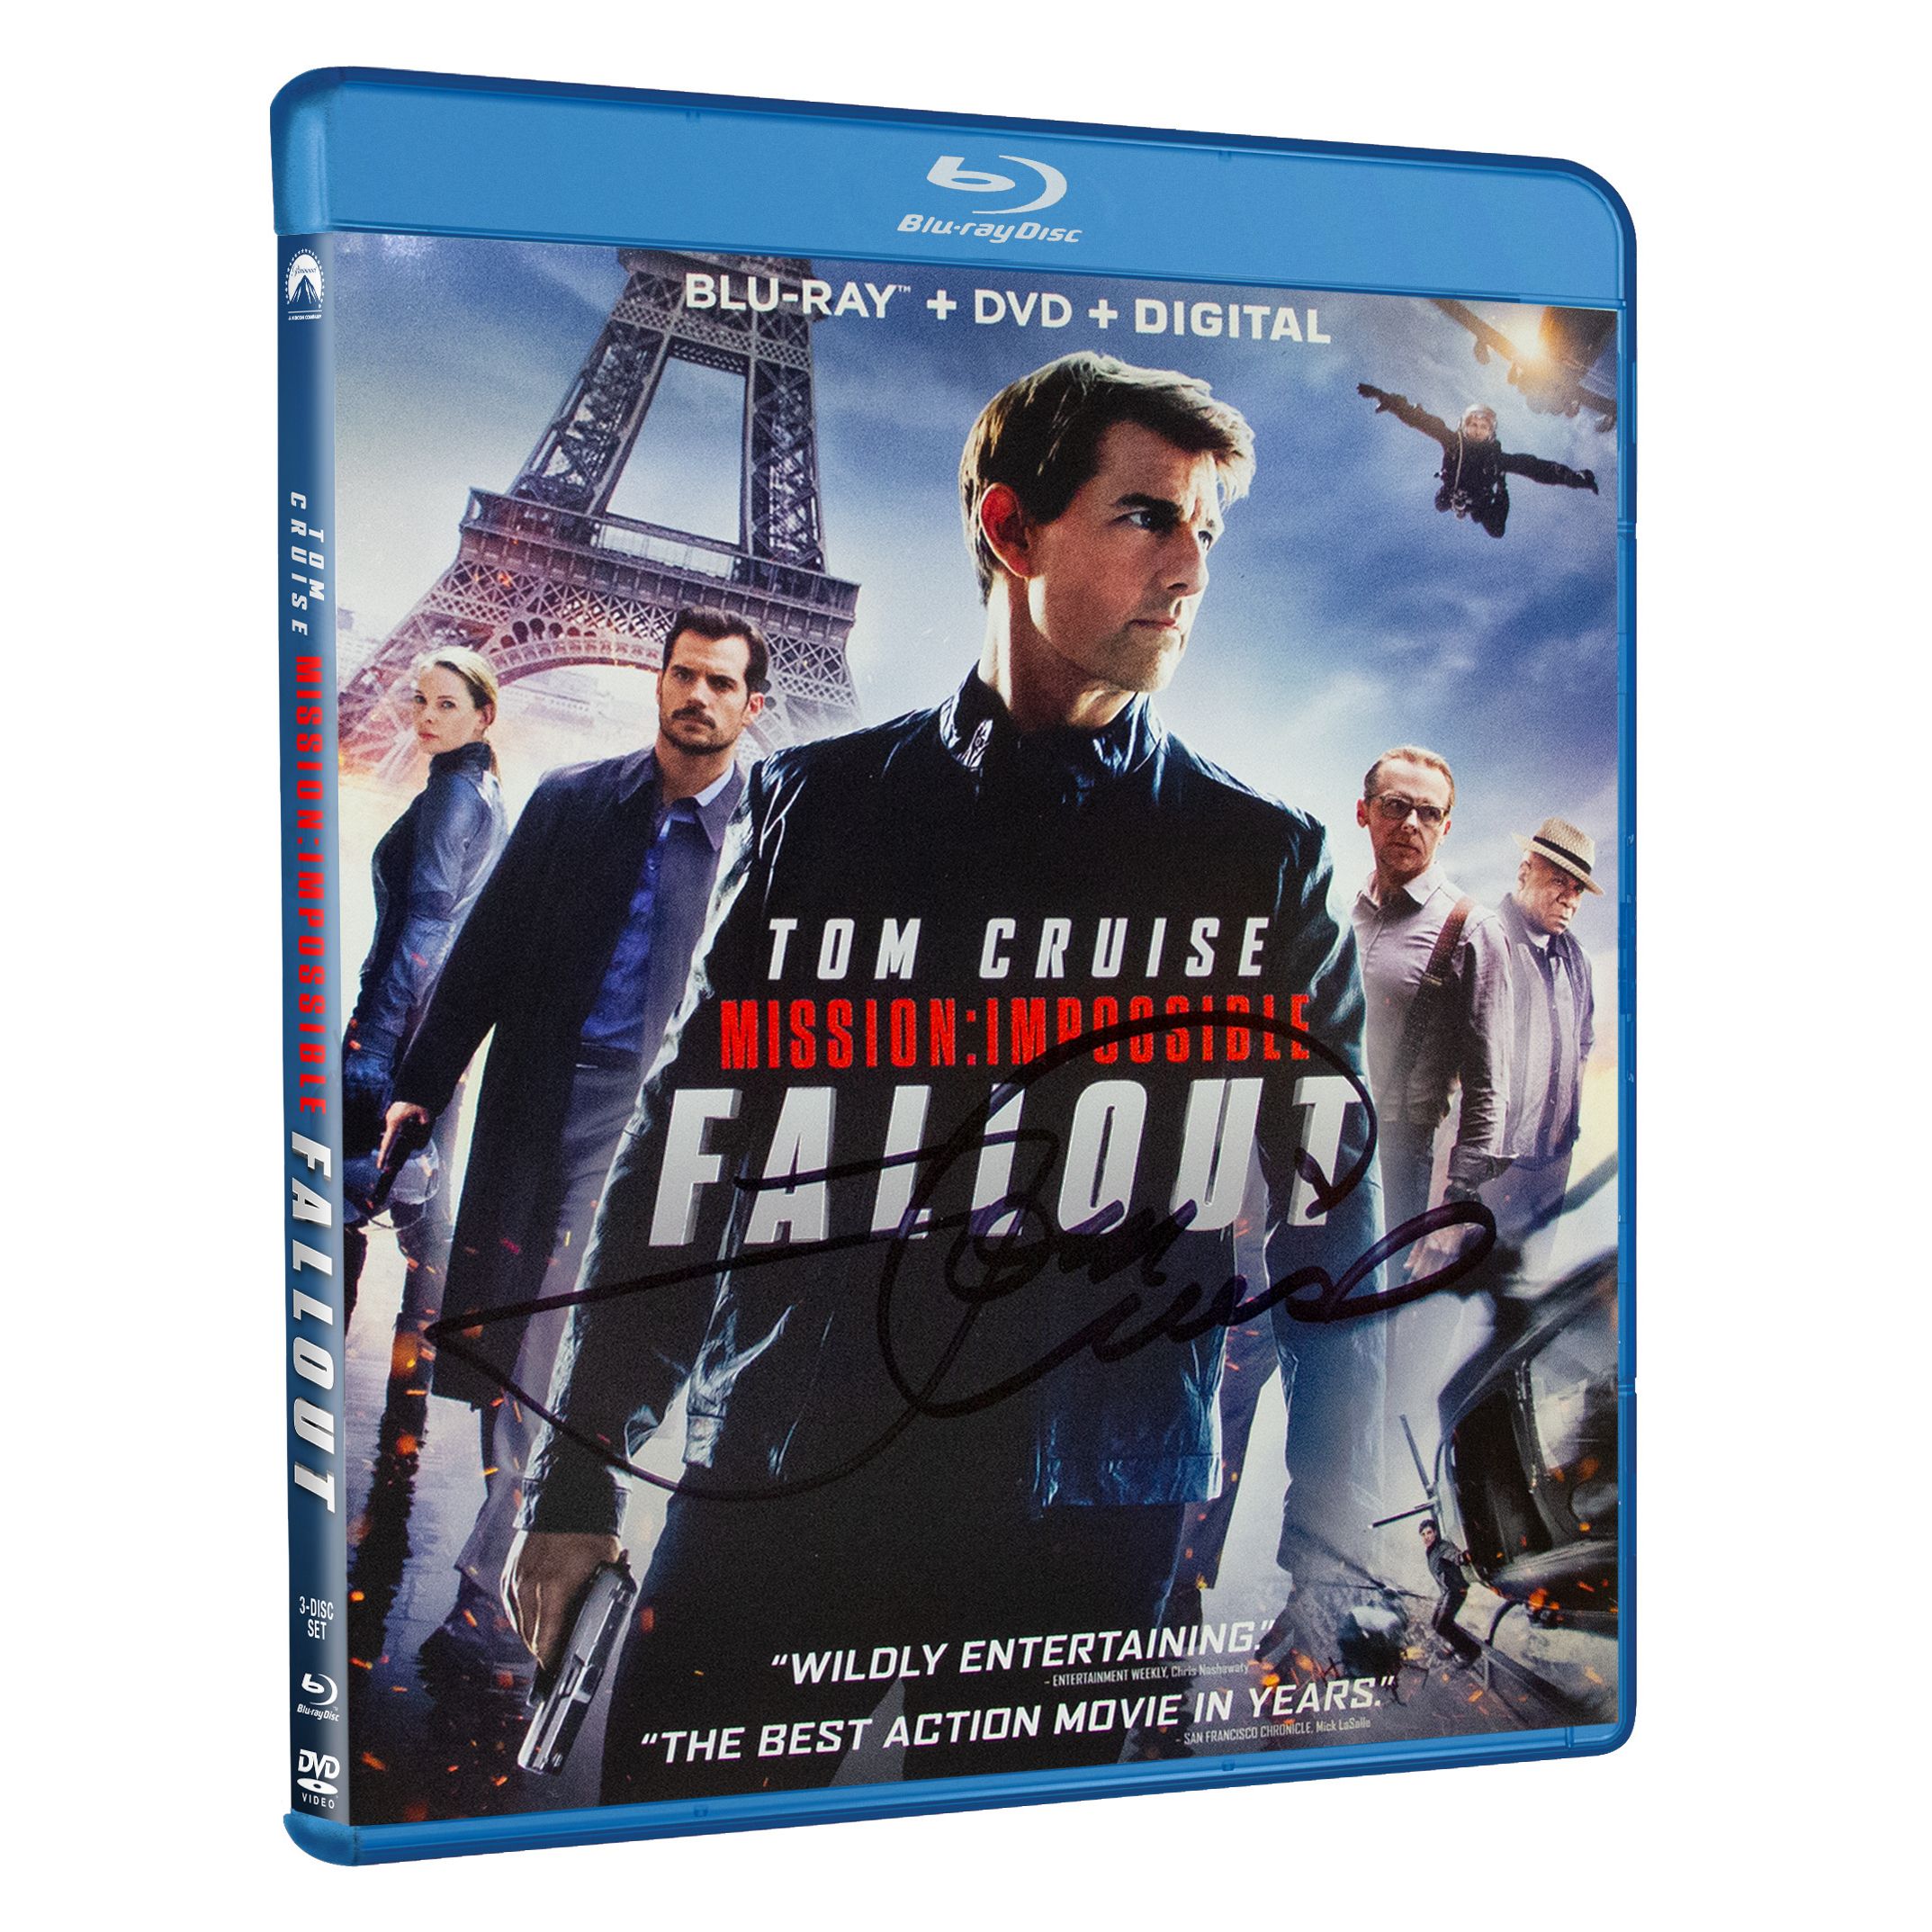 Mission Impossible Fallout Signed by Tom Cruise